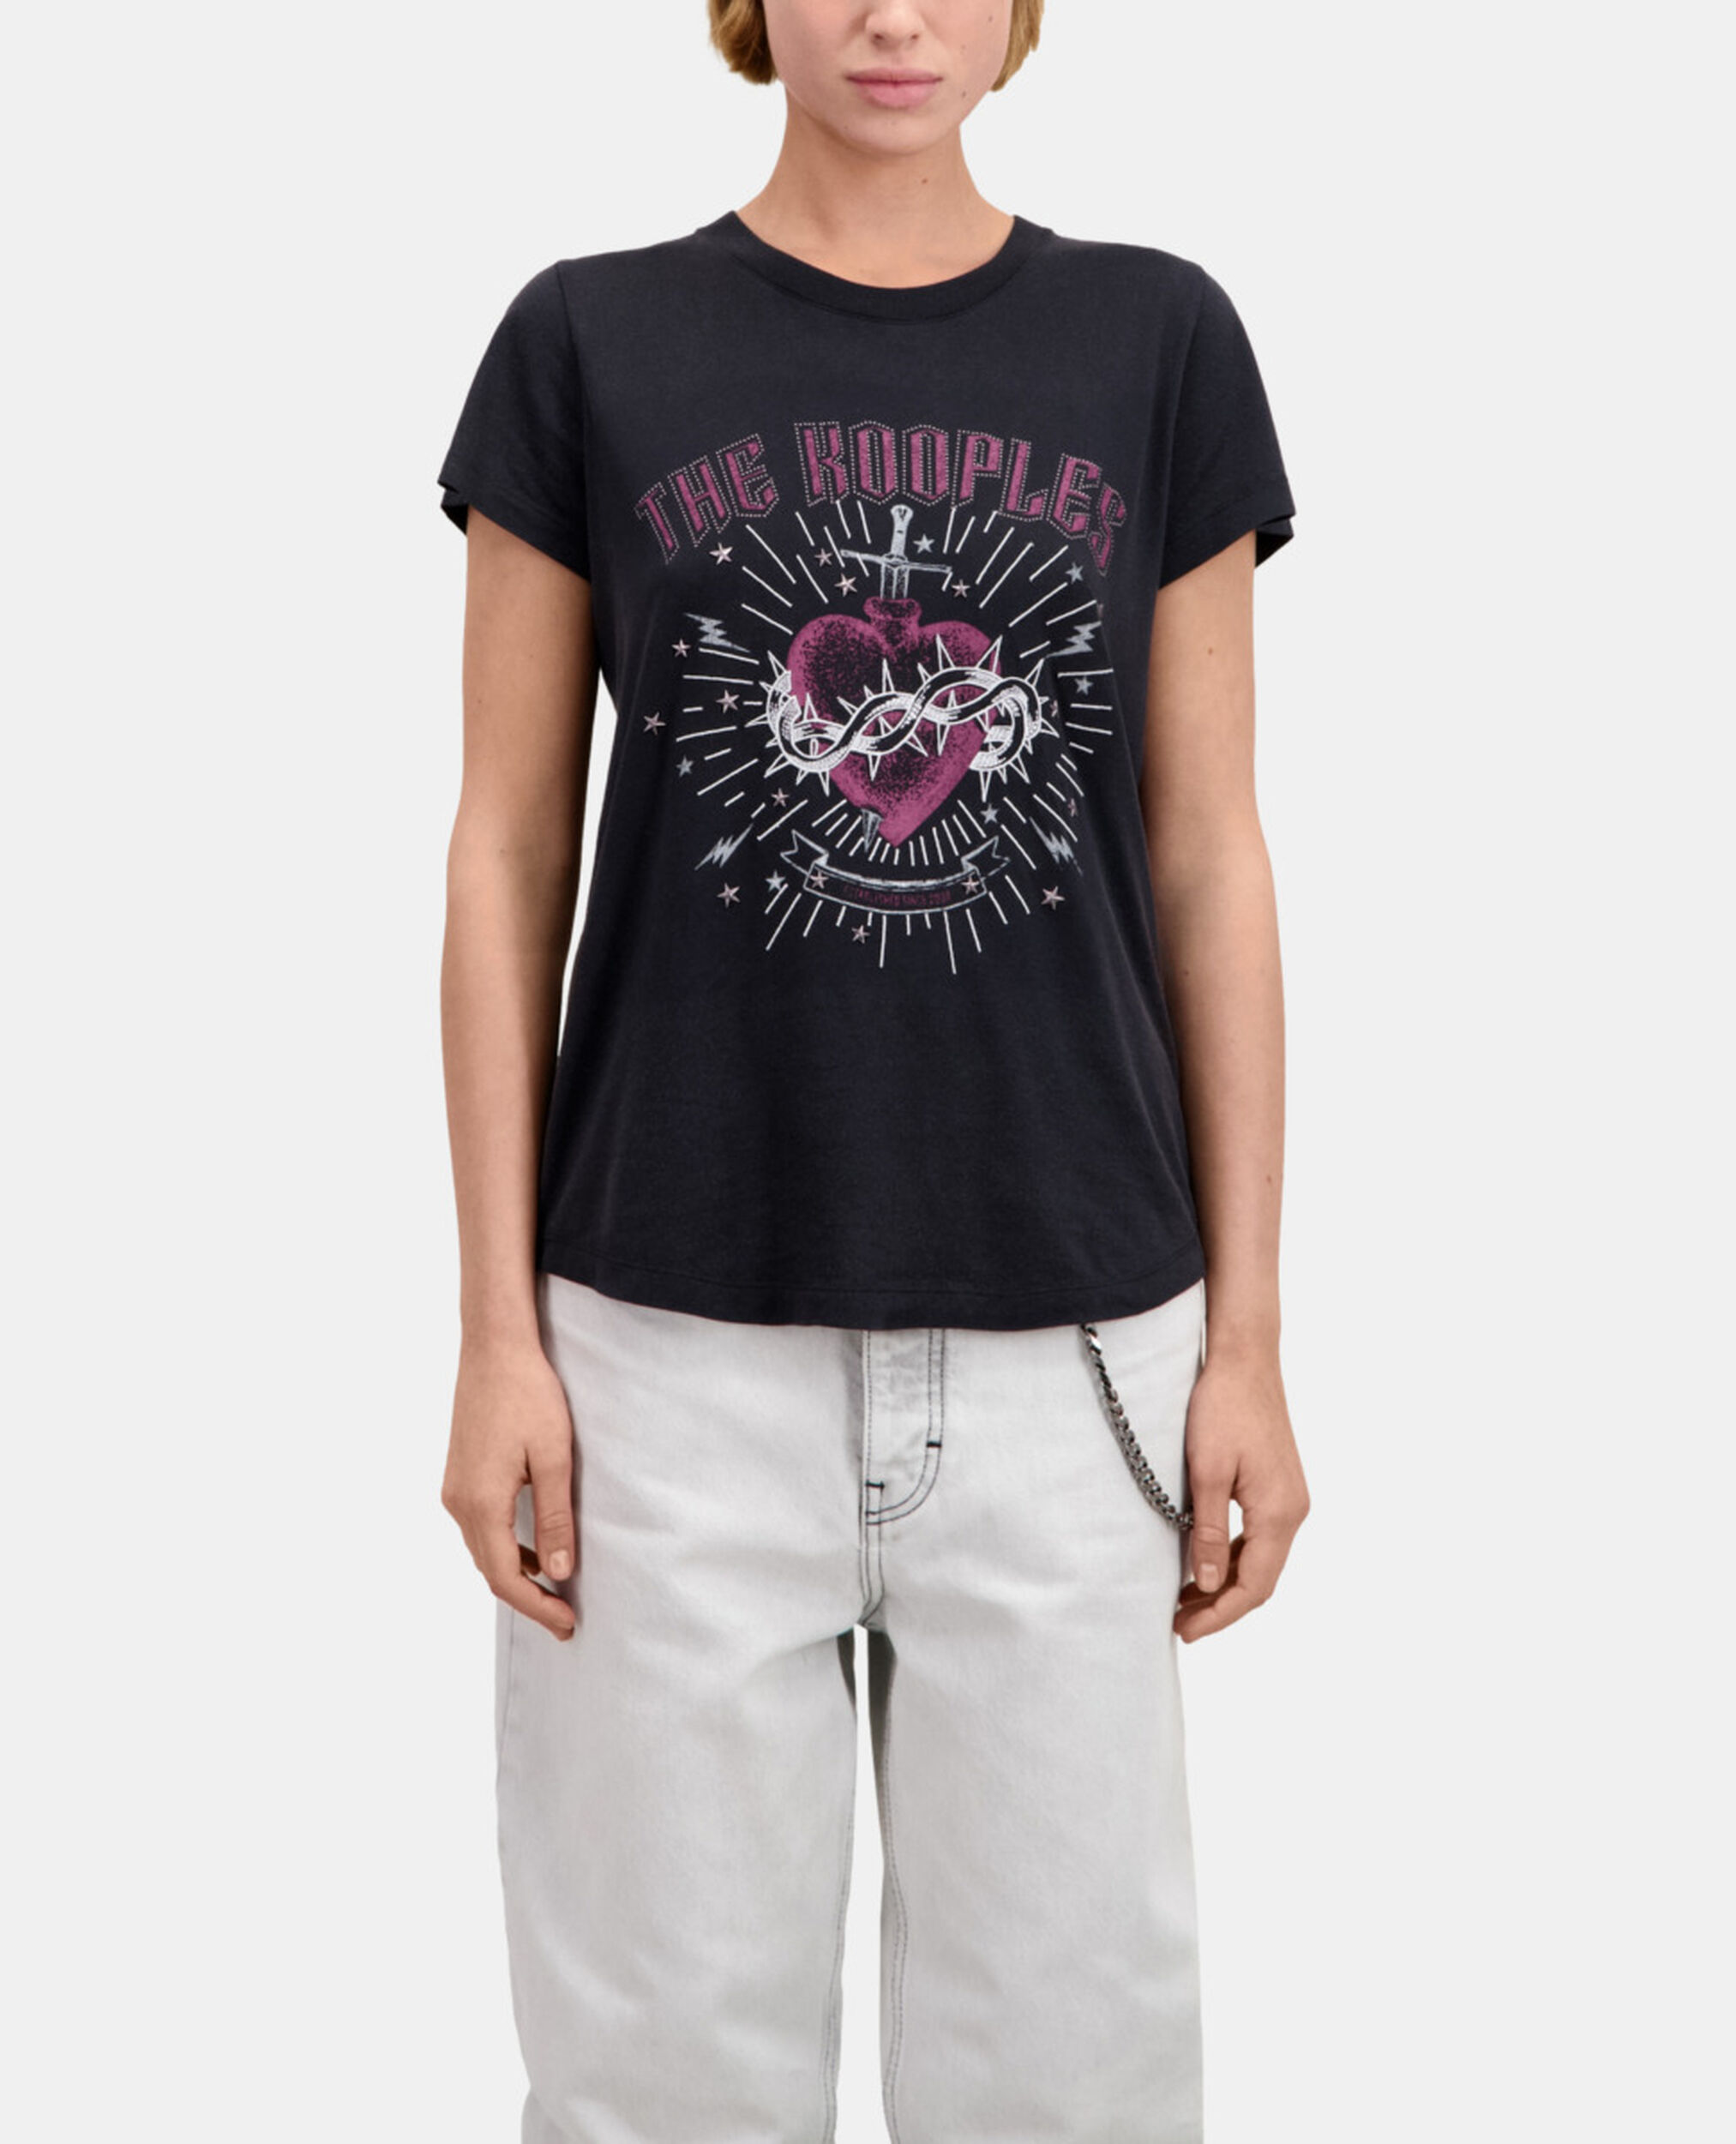 Women's black t-shirt with dagger through heart serigraphy, BLACK, hi-res image number null